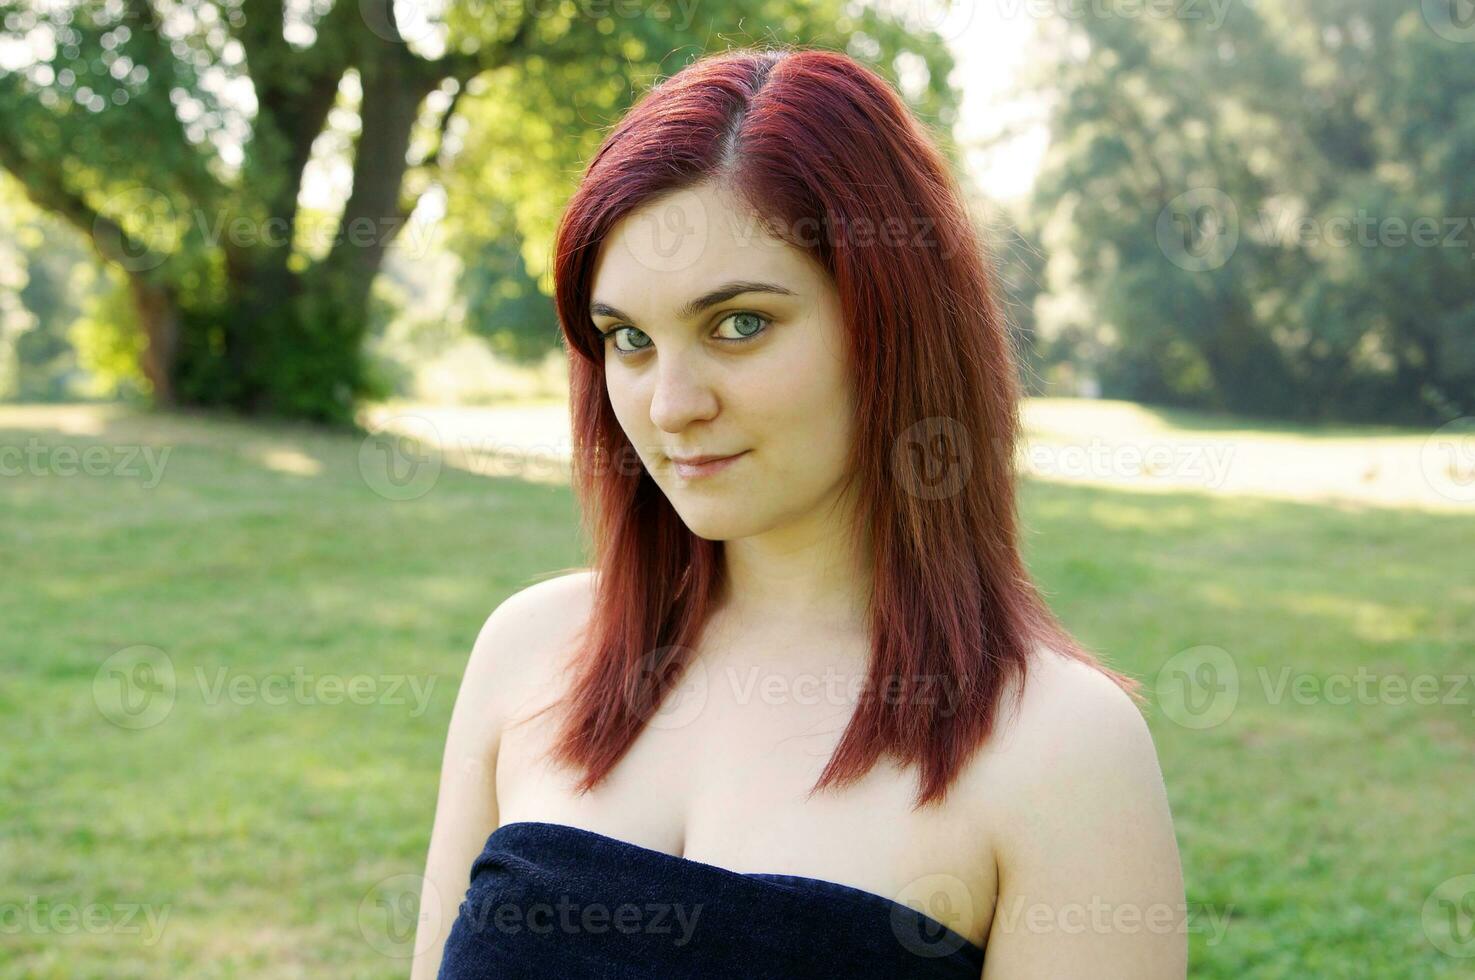 outdoor portrait of a young woman photo